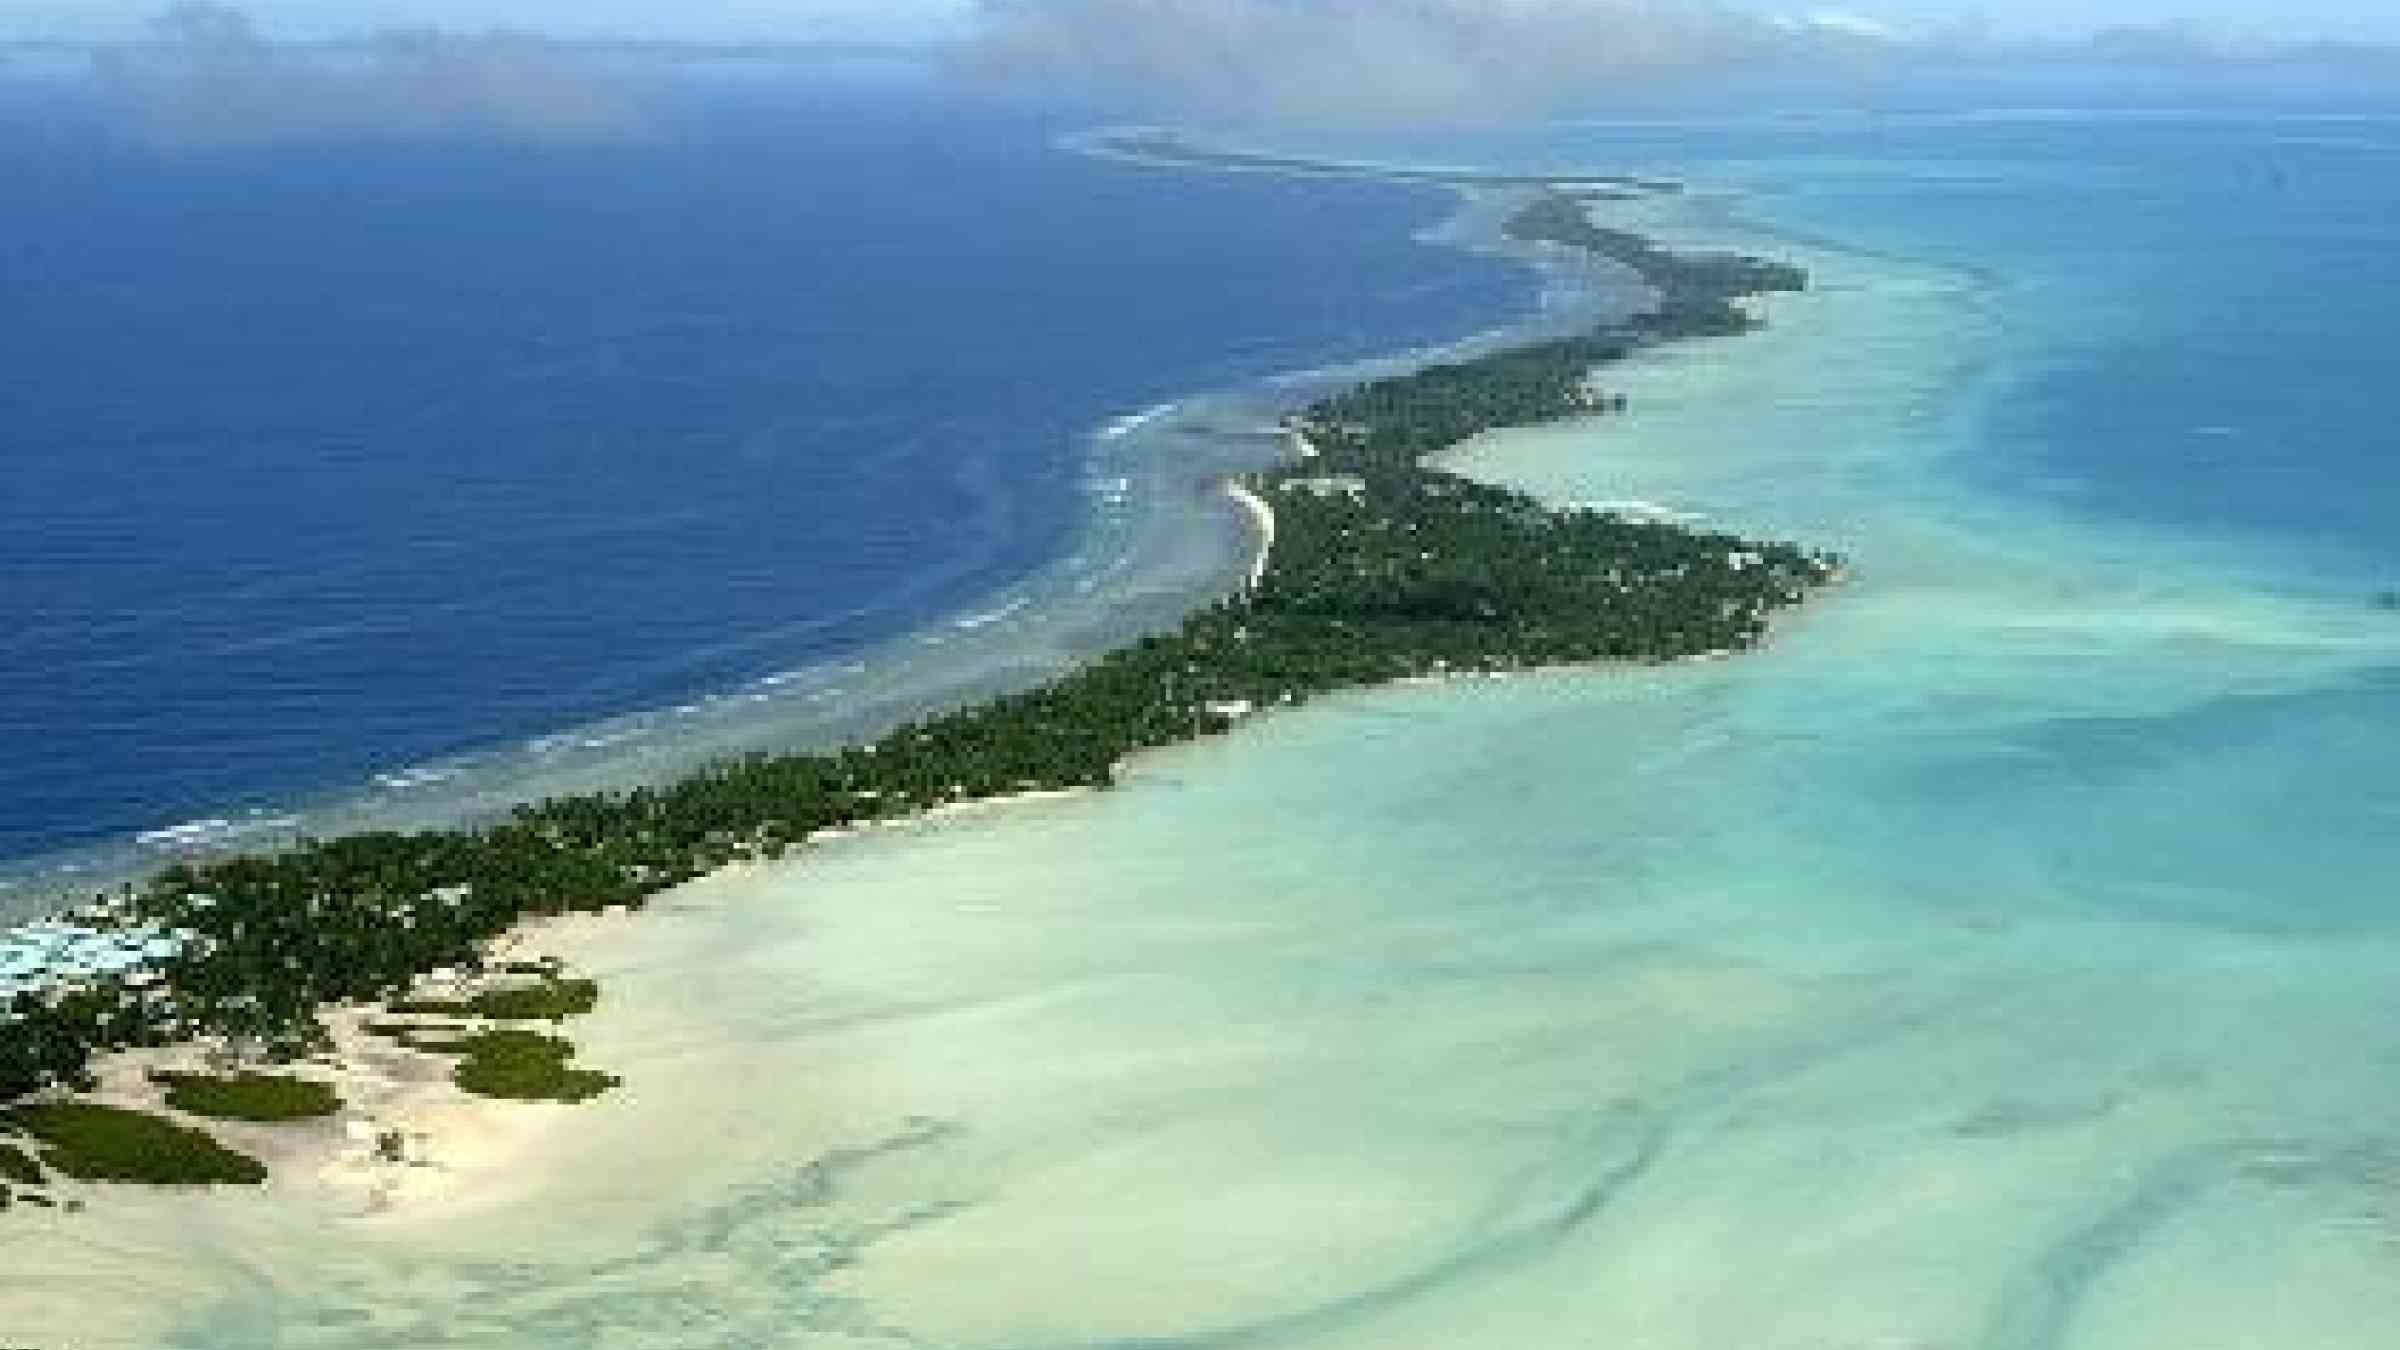 Kiribati, made up of low-lying atolls, is one of the most climate-vulnerable nations in the world